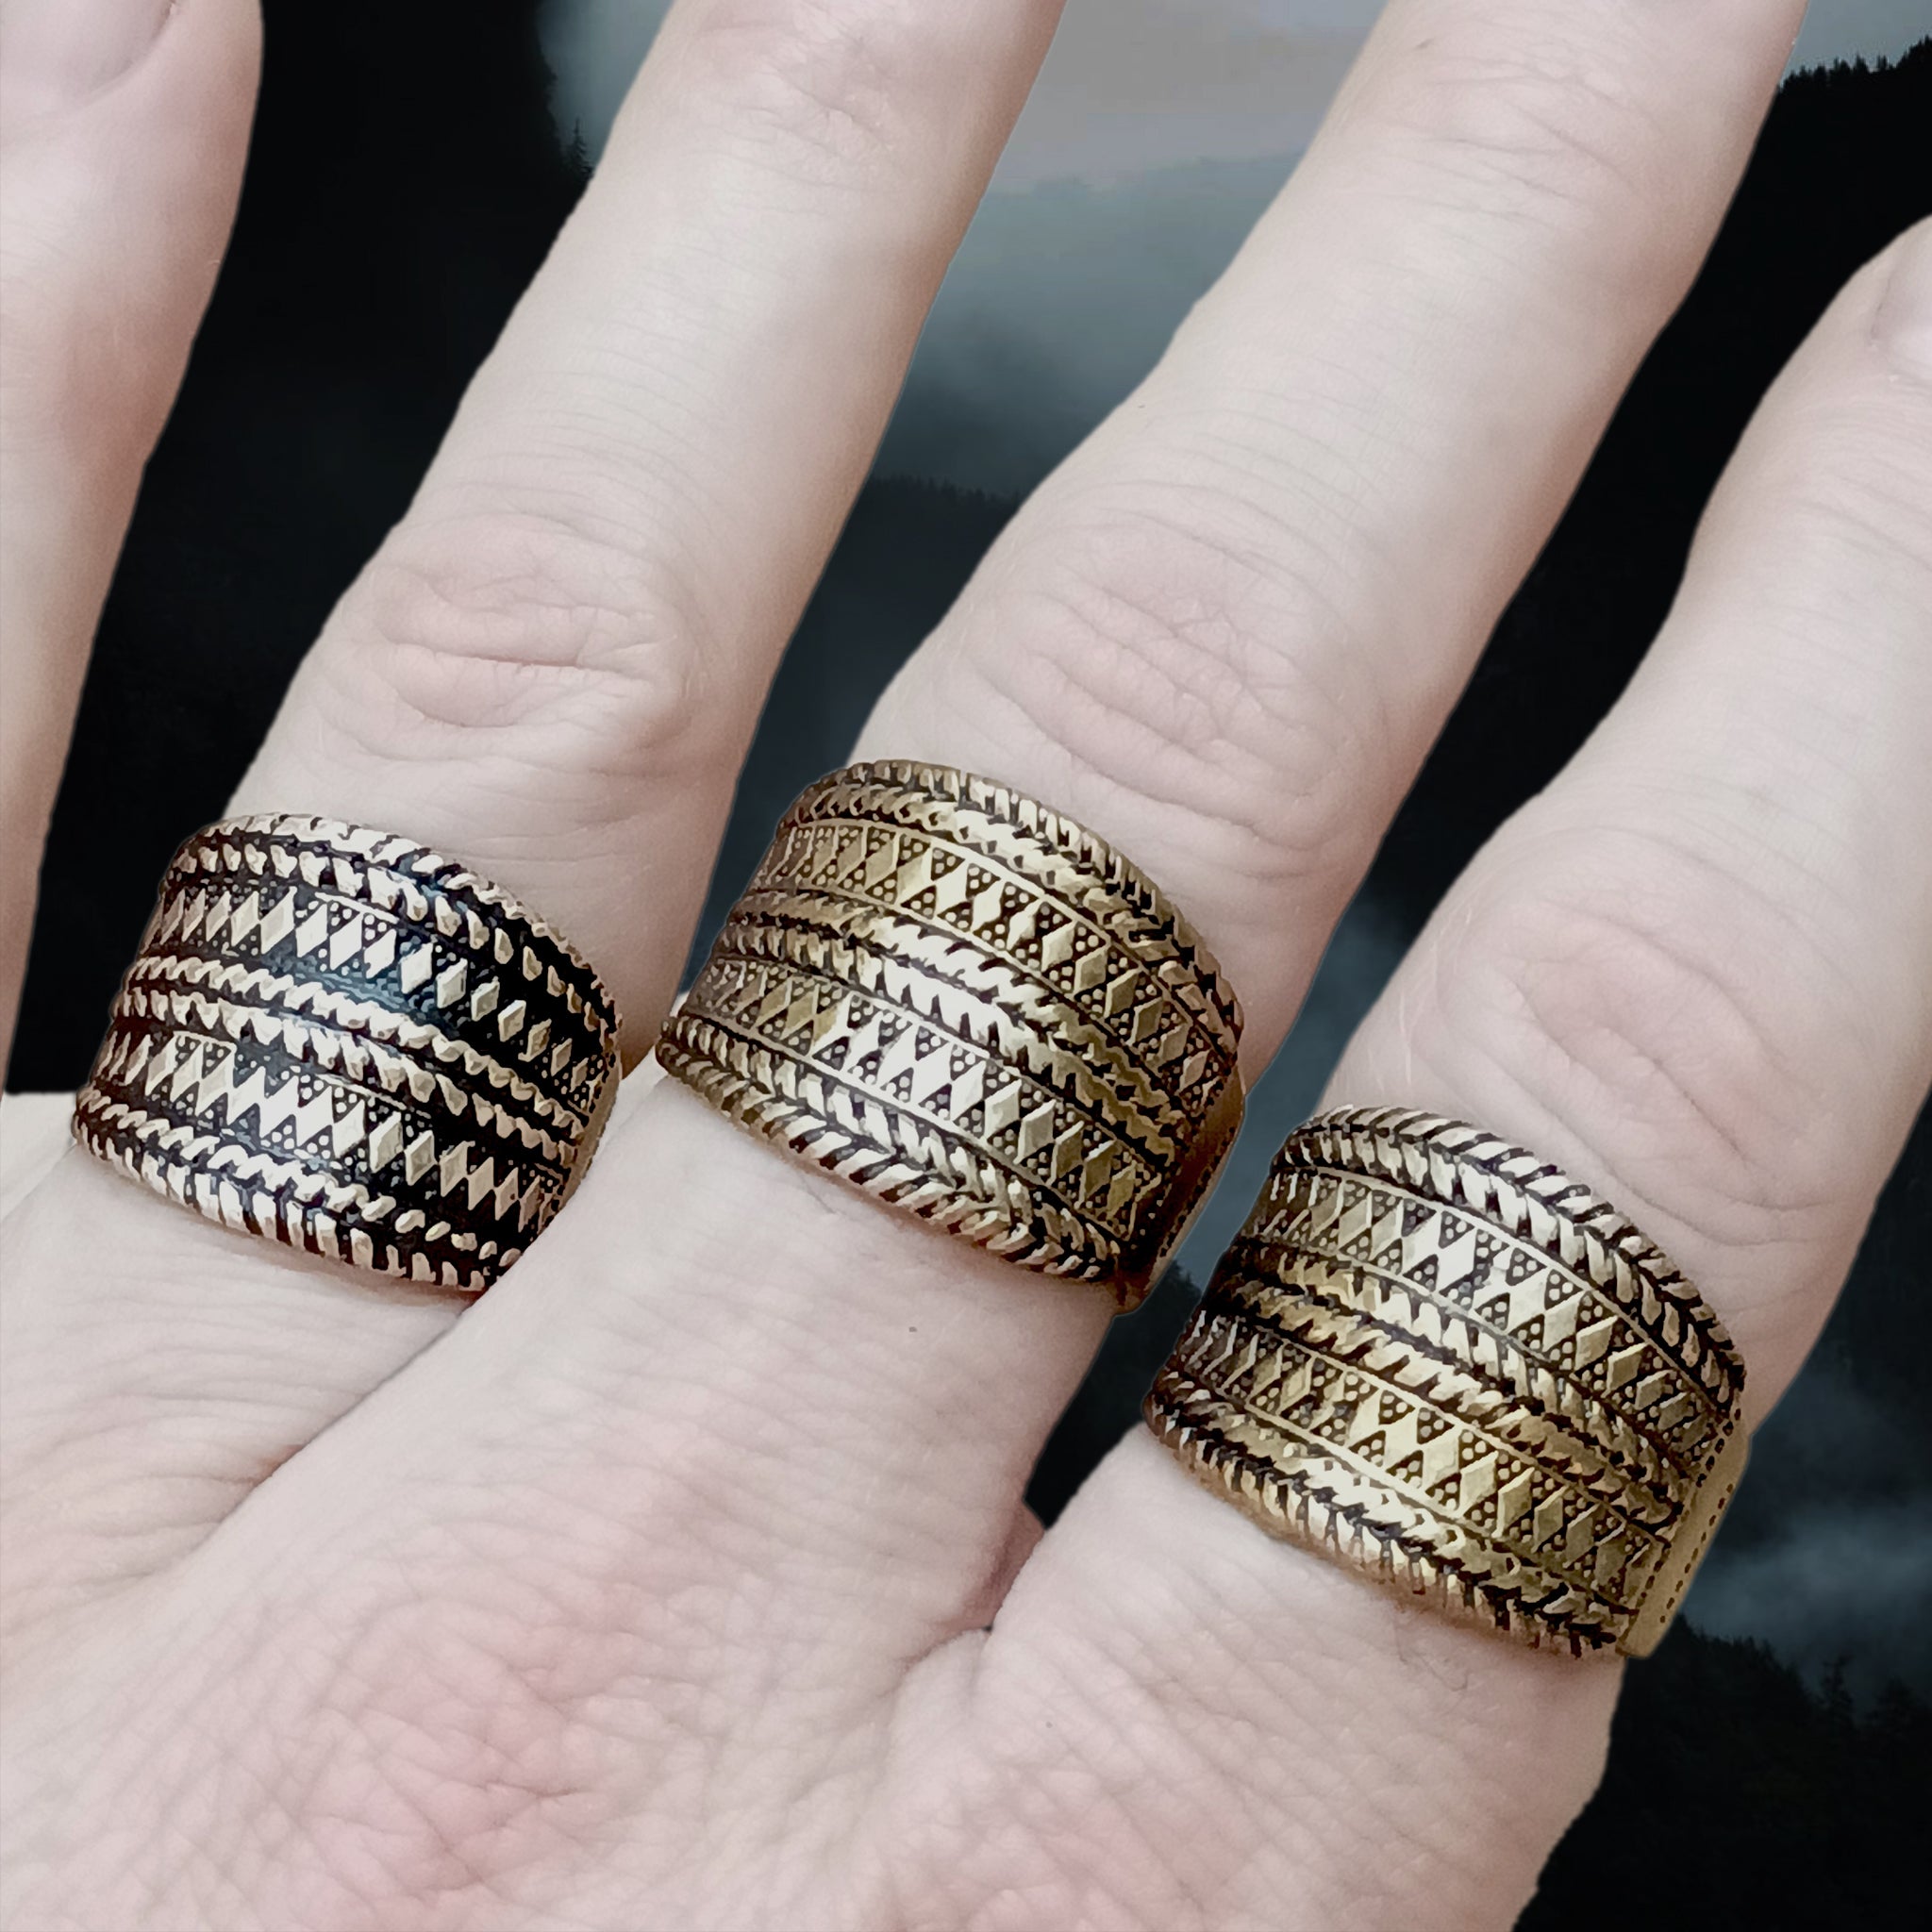 Bronze Replica Rings with Decorated Viking Design on Fingers